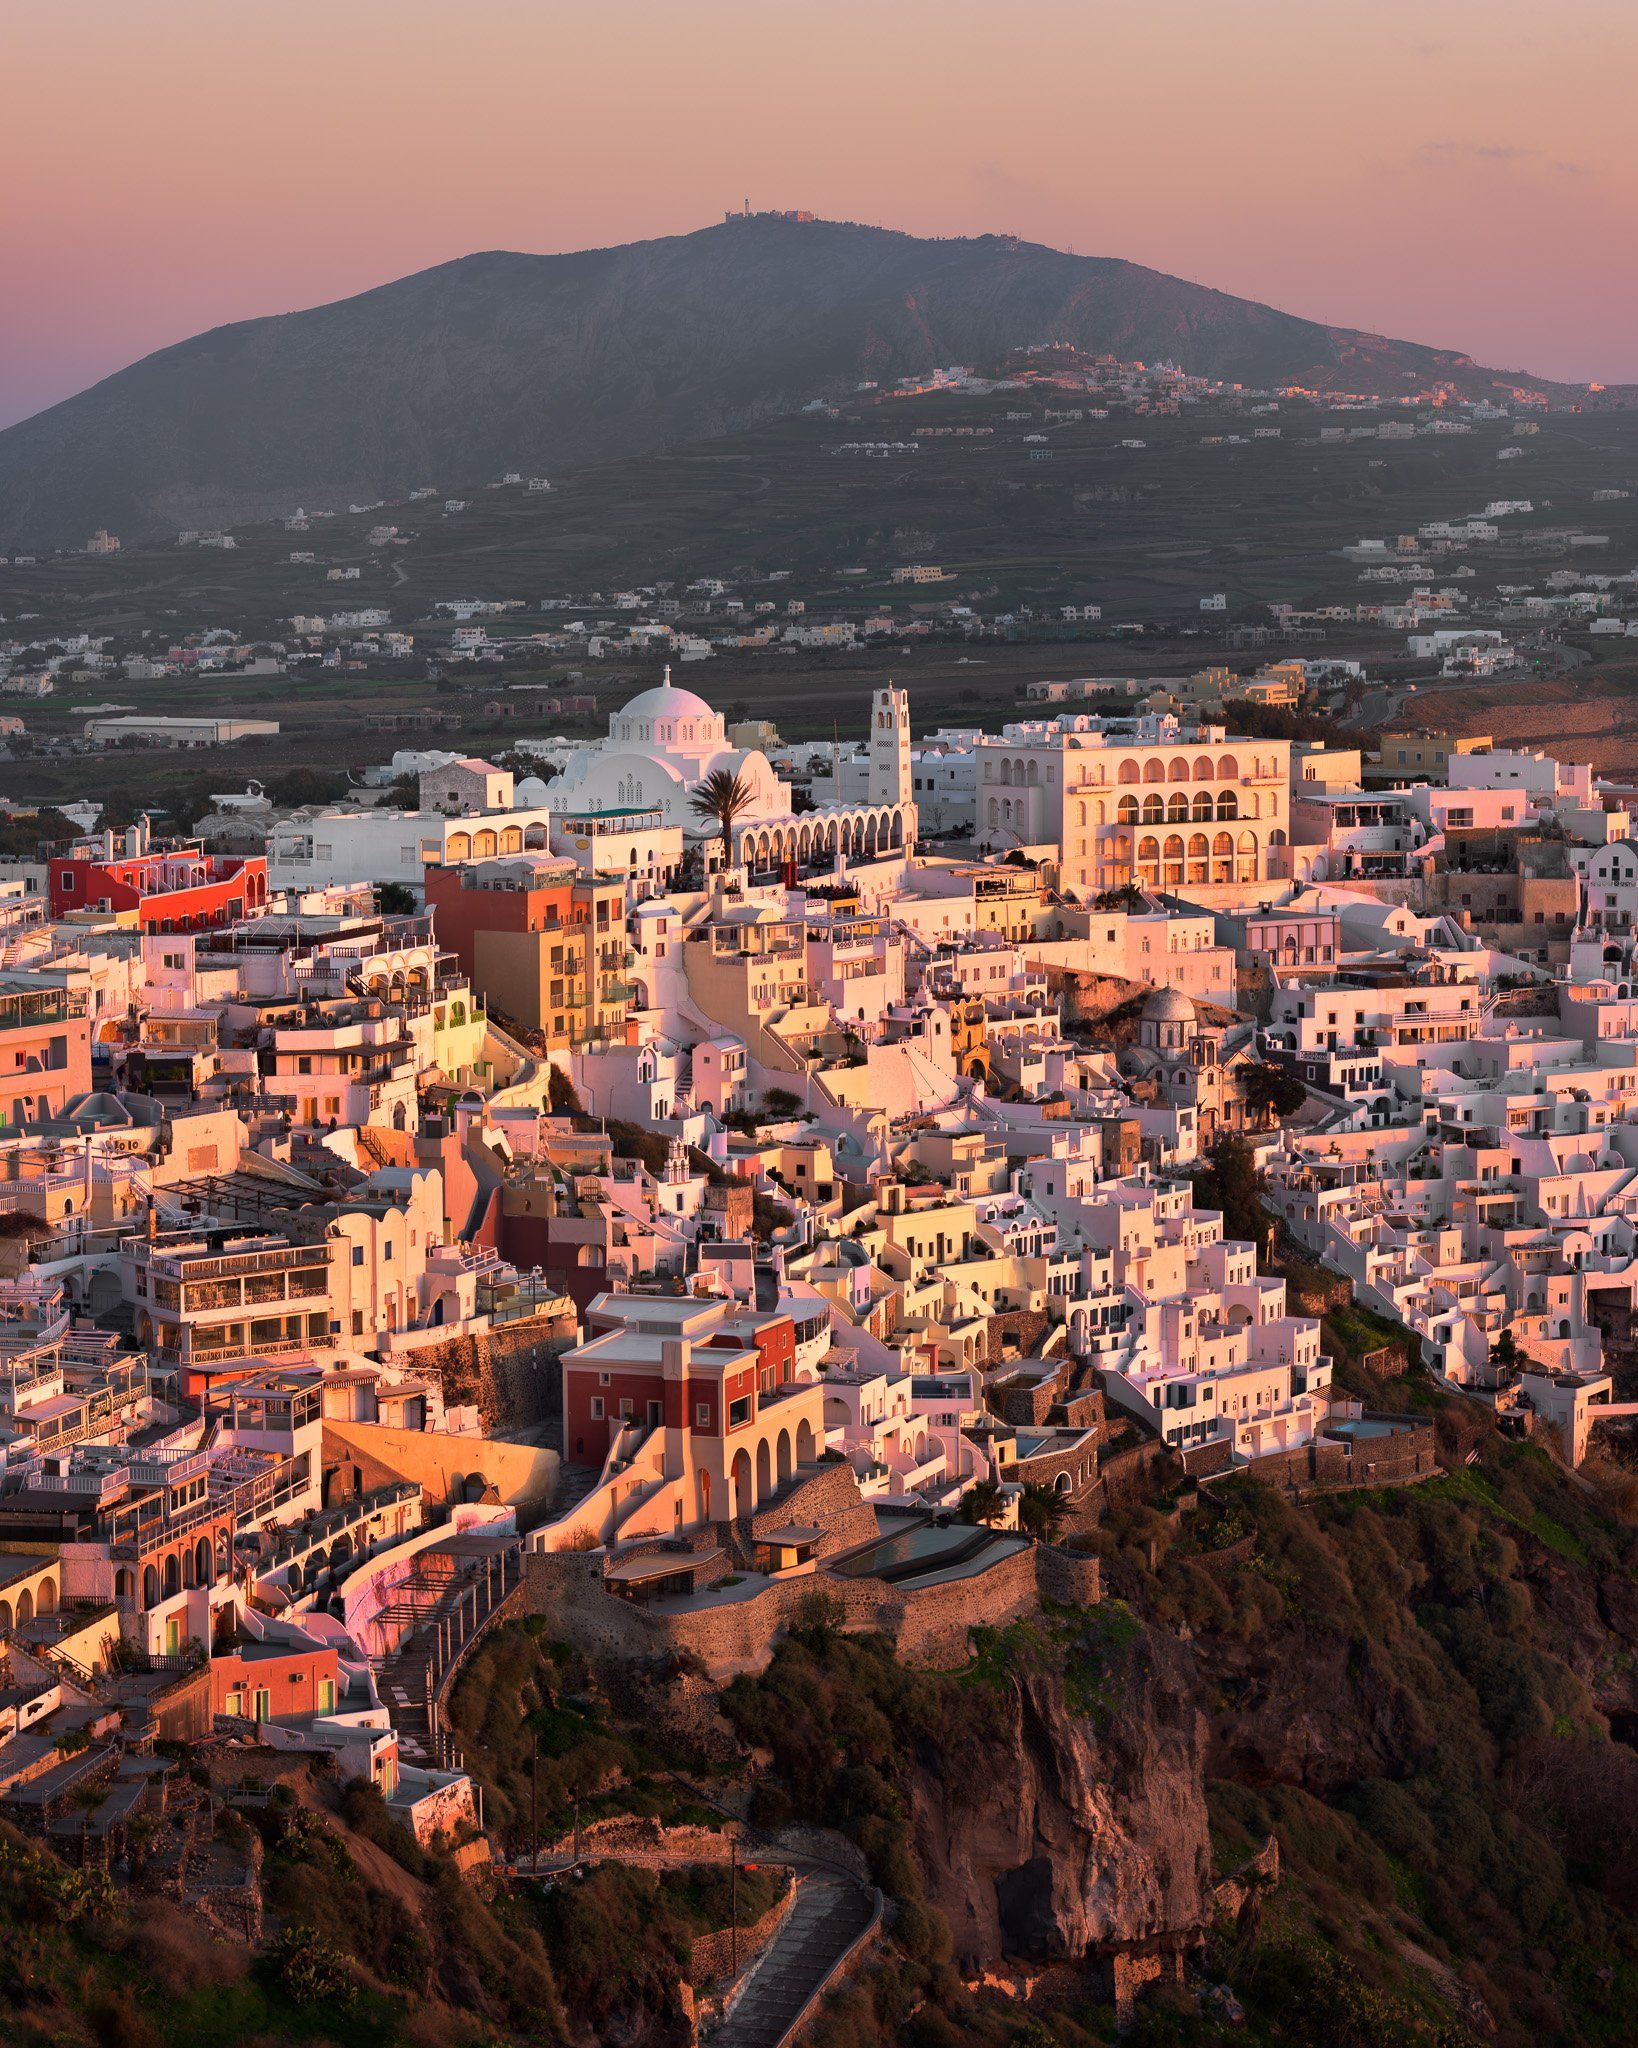 aegean, aerial, architecture, building, capital, cathedral, church, city, cityscape, cliff, coast, culture, cyclades, dome, europe, european, evening, fira, greece, greek, hill, history, house, iconic, island, landmark, landscape, lights, mediterranean, m, Andrey Omelyanchuk